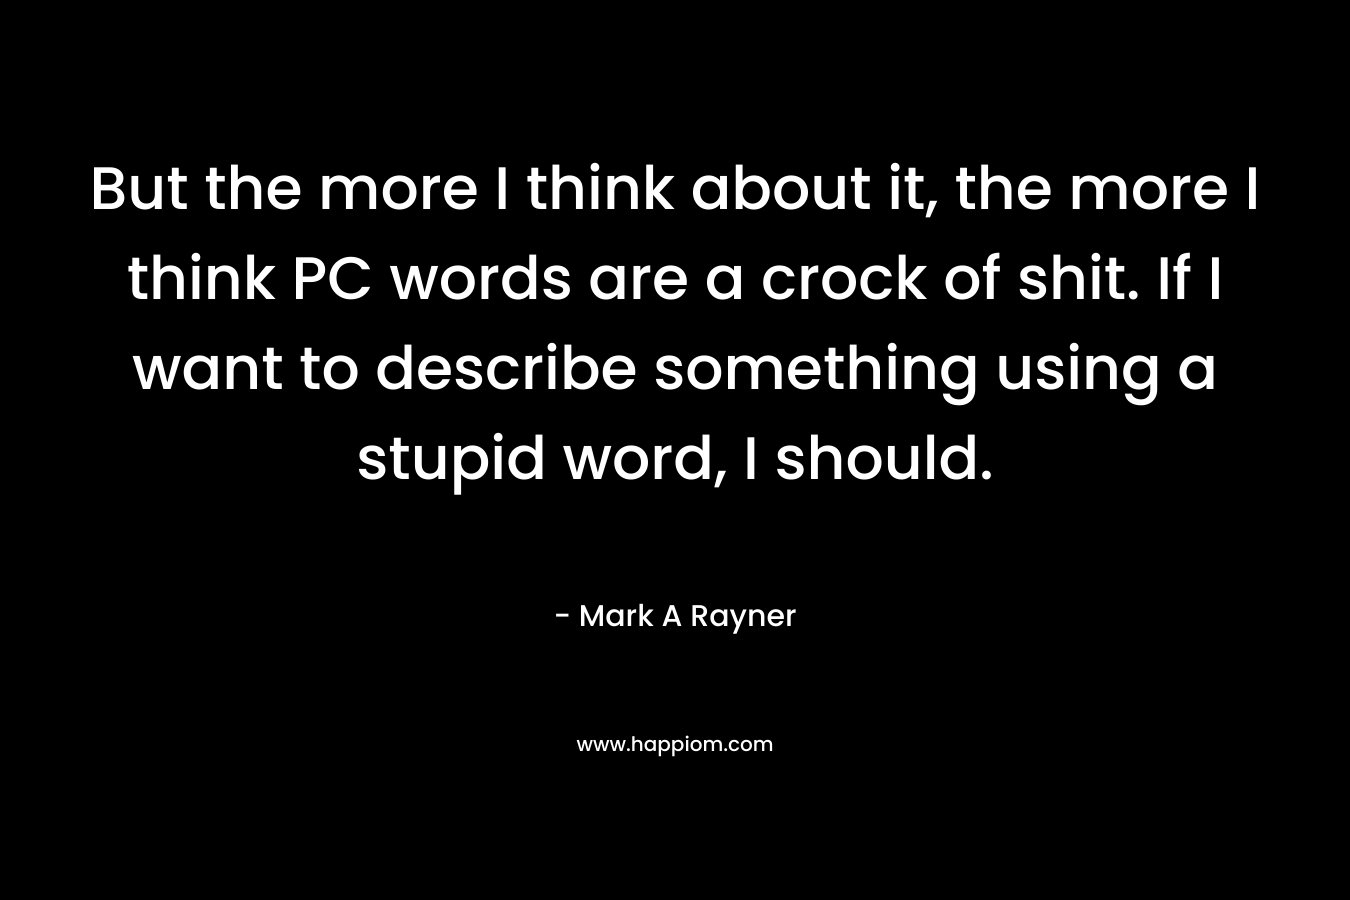 But the more I think about it, the more I think PC words are a crock of shit. If I want to describe something using a stupid word, I should.